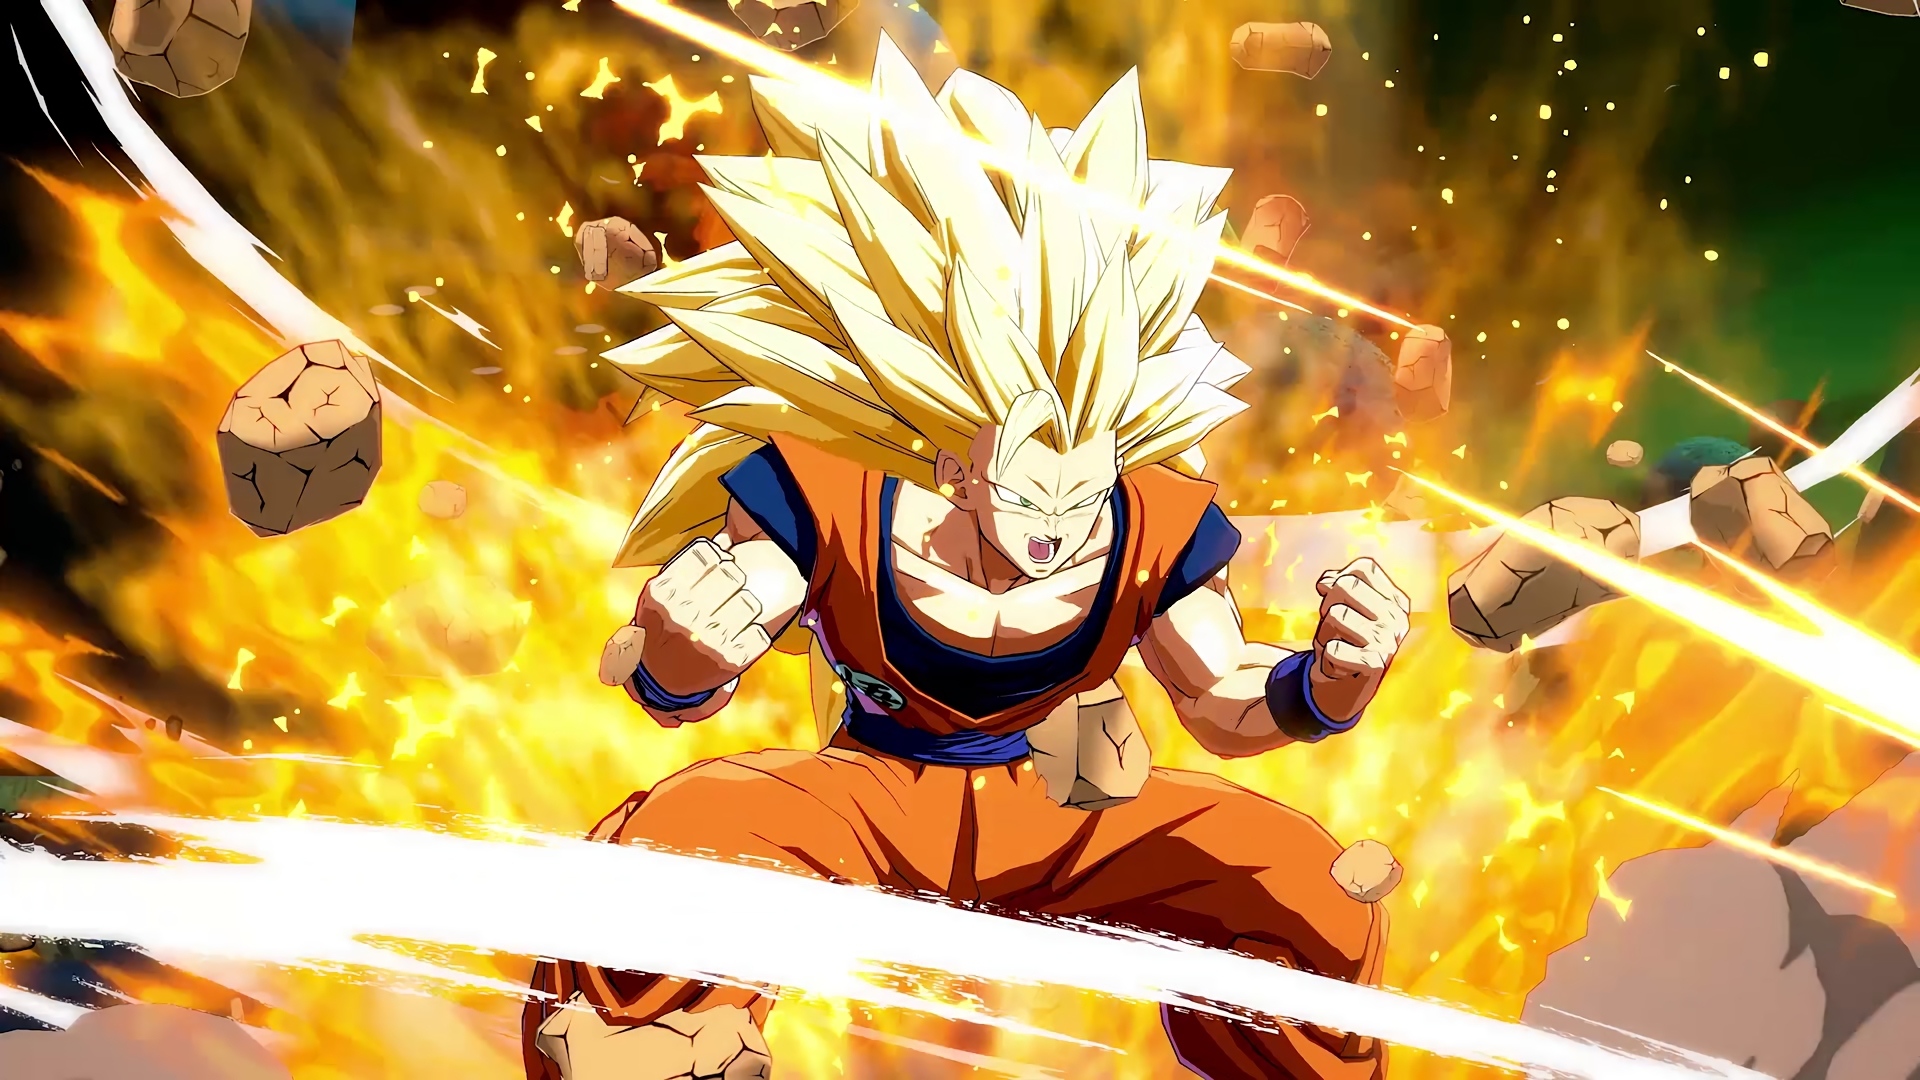 Video Game Dragon Ball FighterZ HD Wallpaper | Background Image